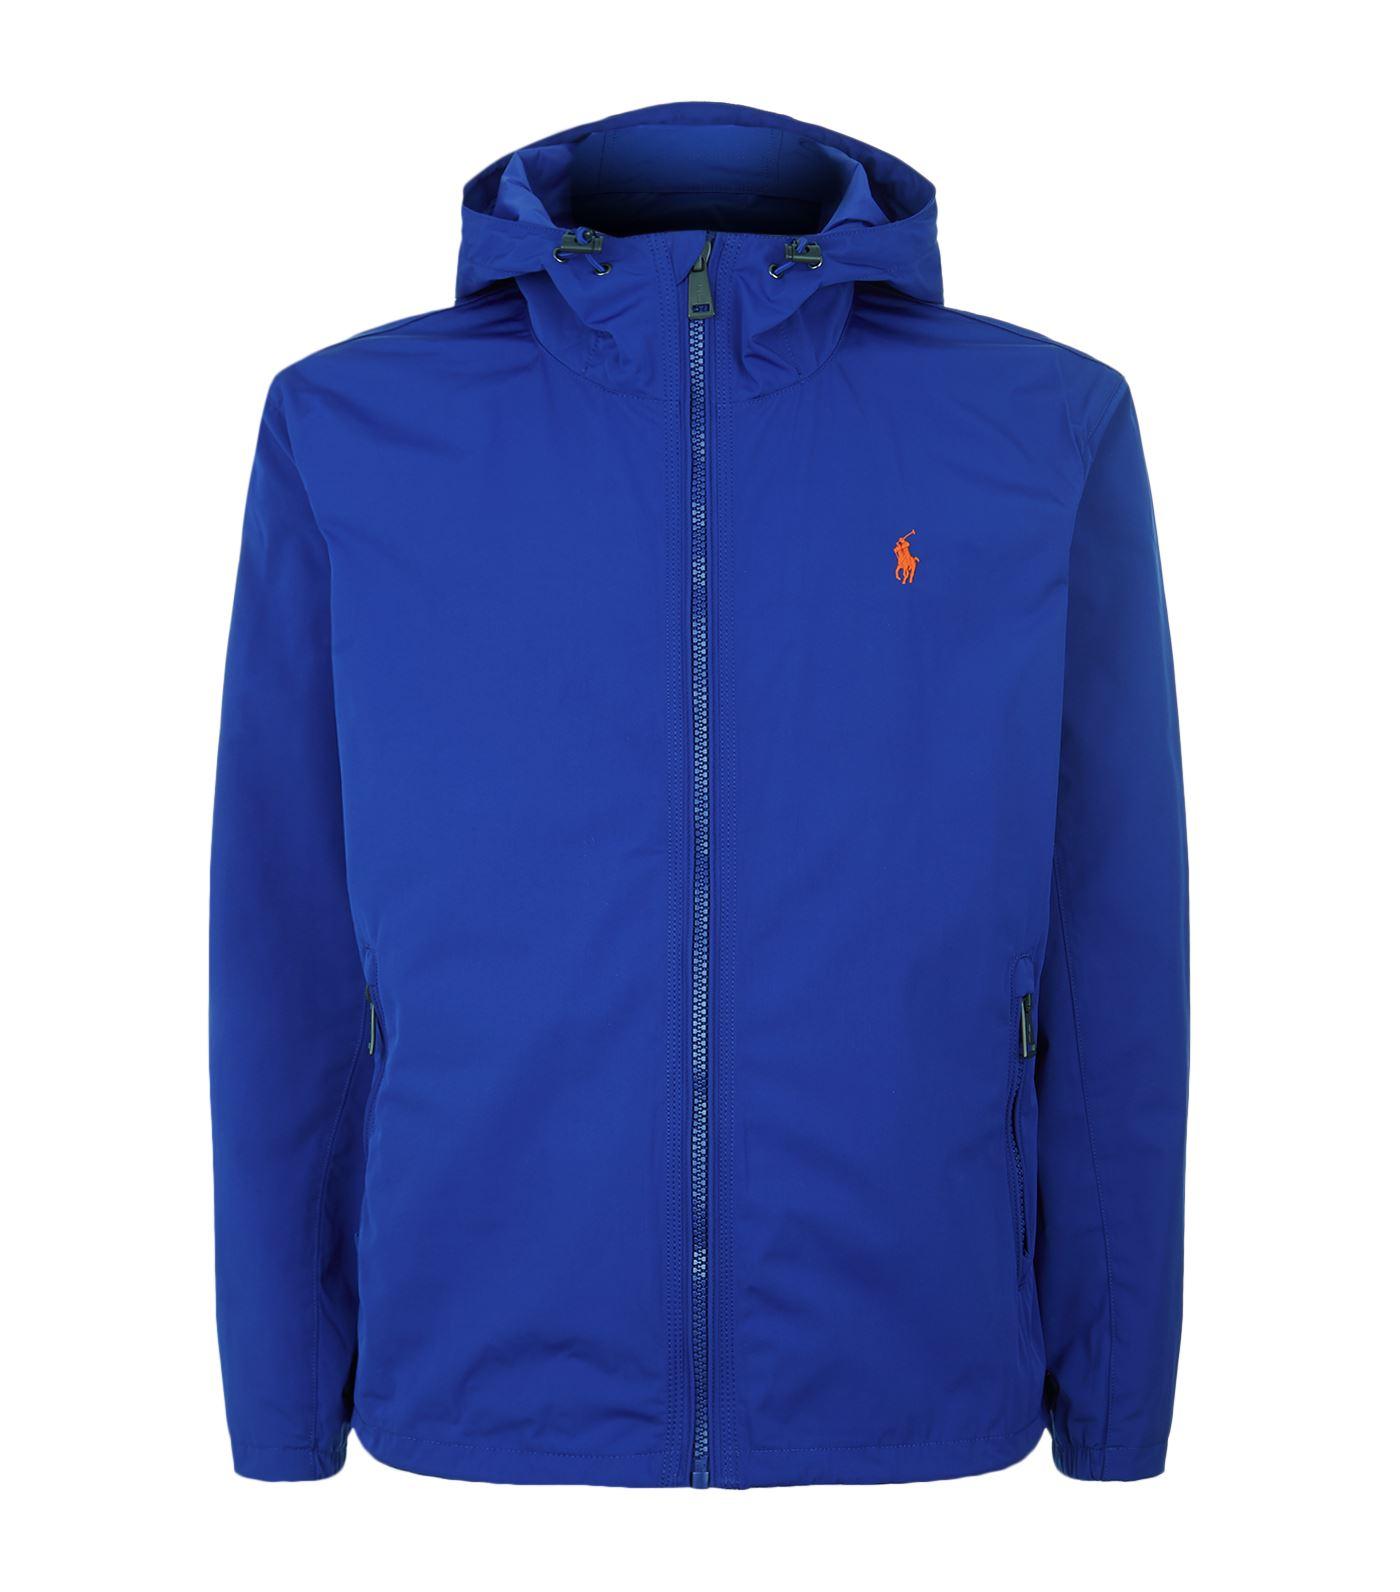 Polo Ralph Lauren Synthetic Thorpe Anorak Jacket in Blue for Men - Lyst